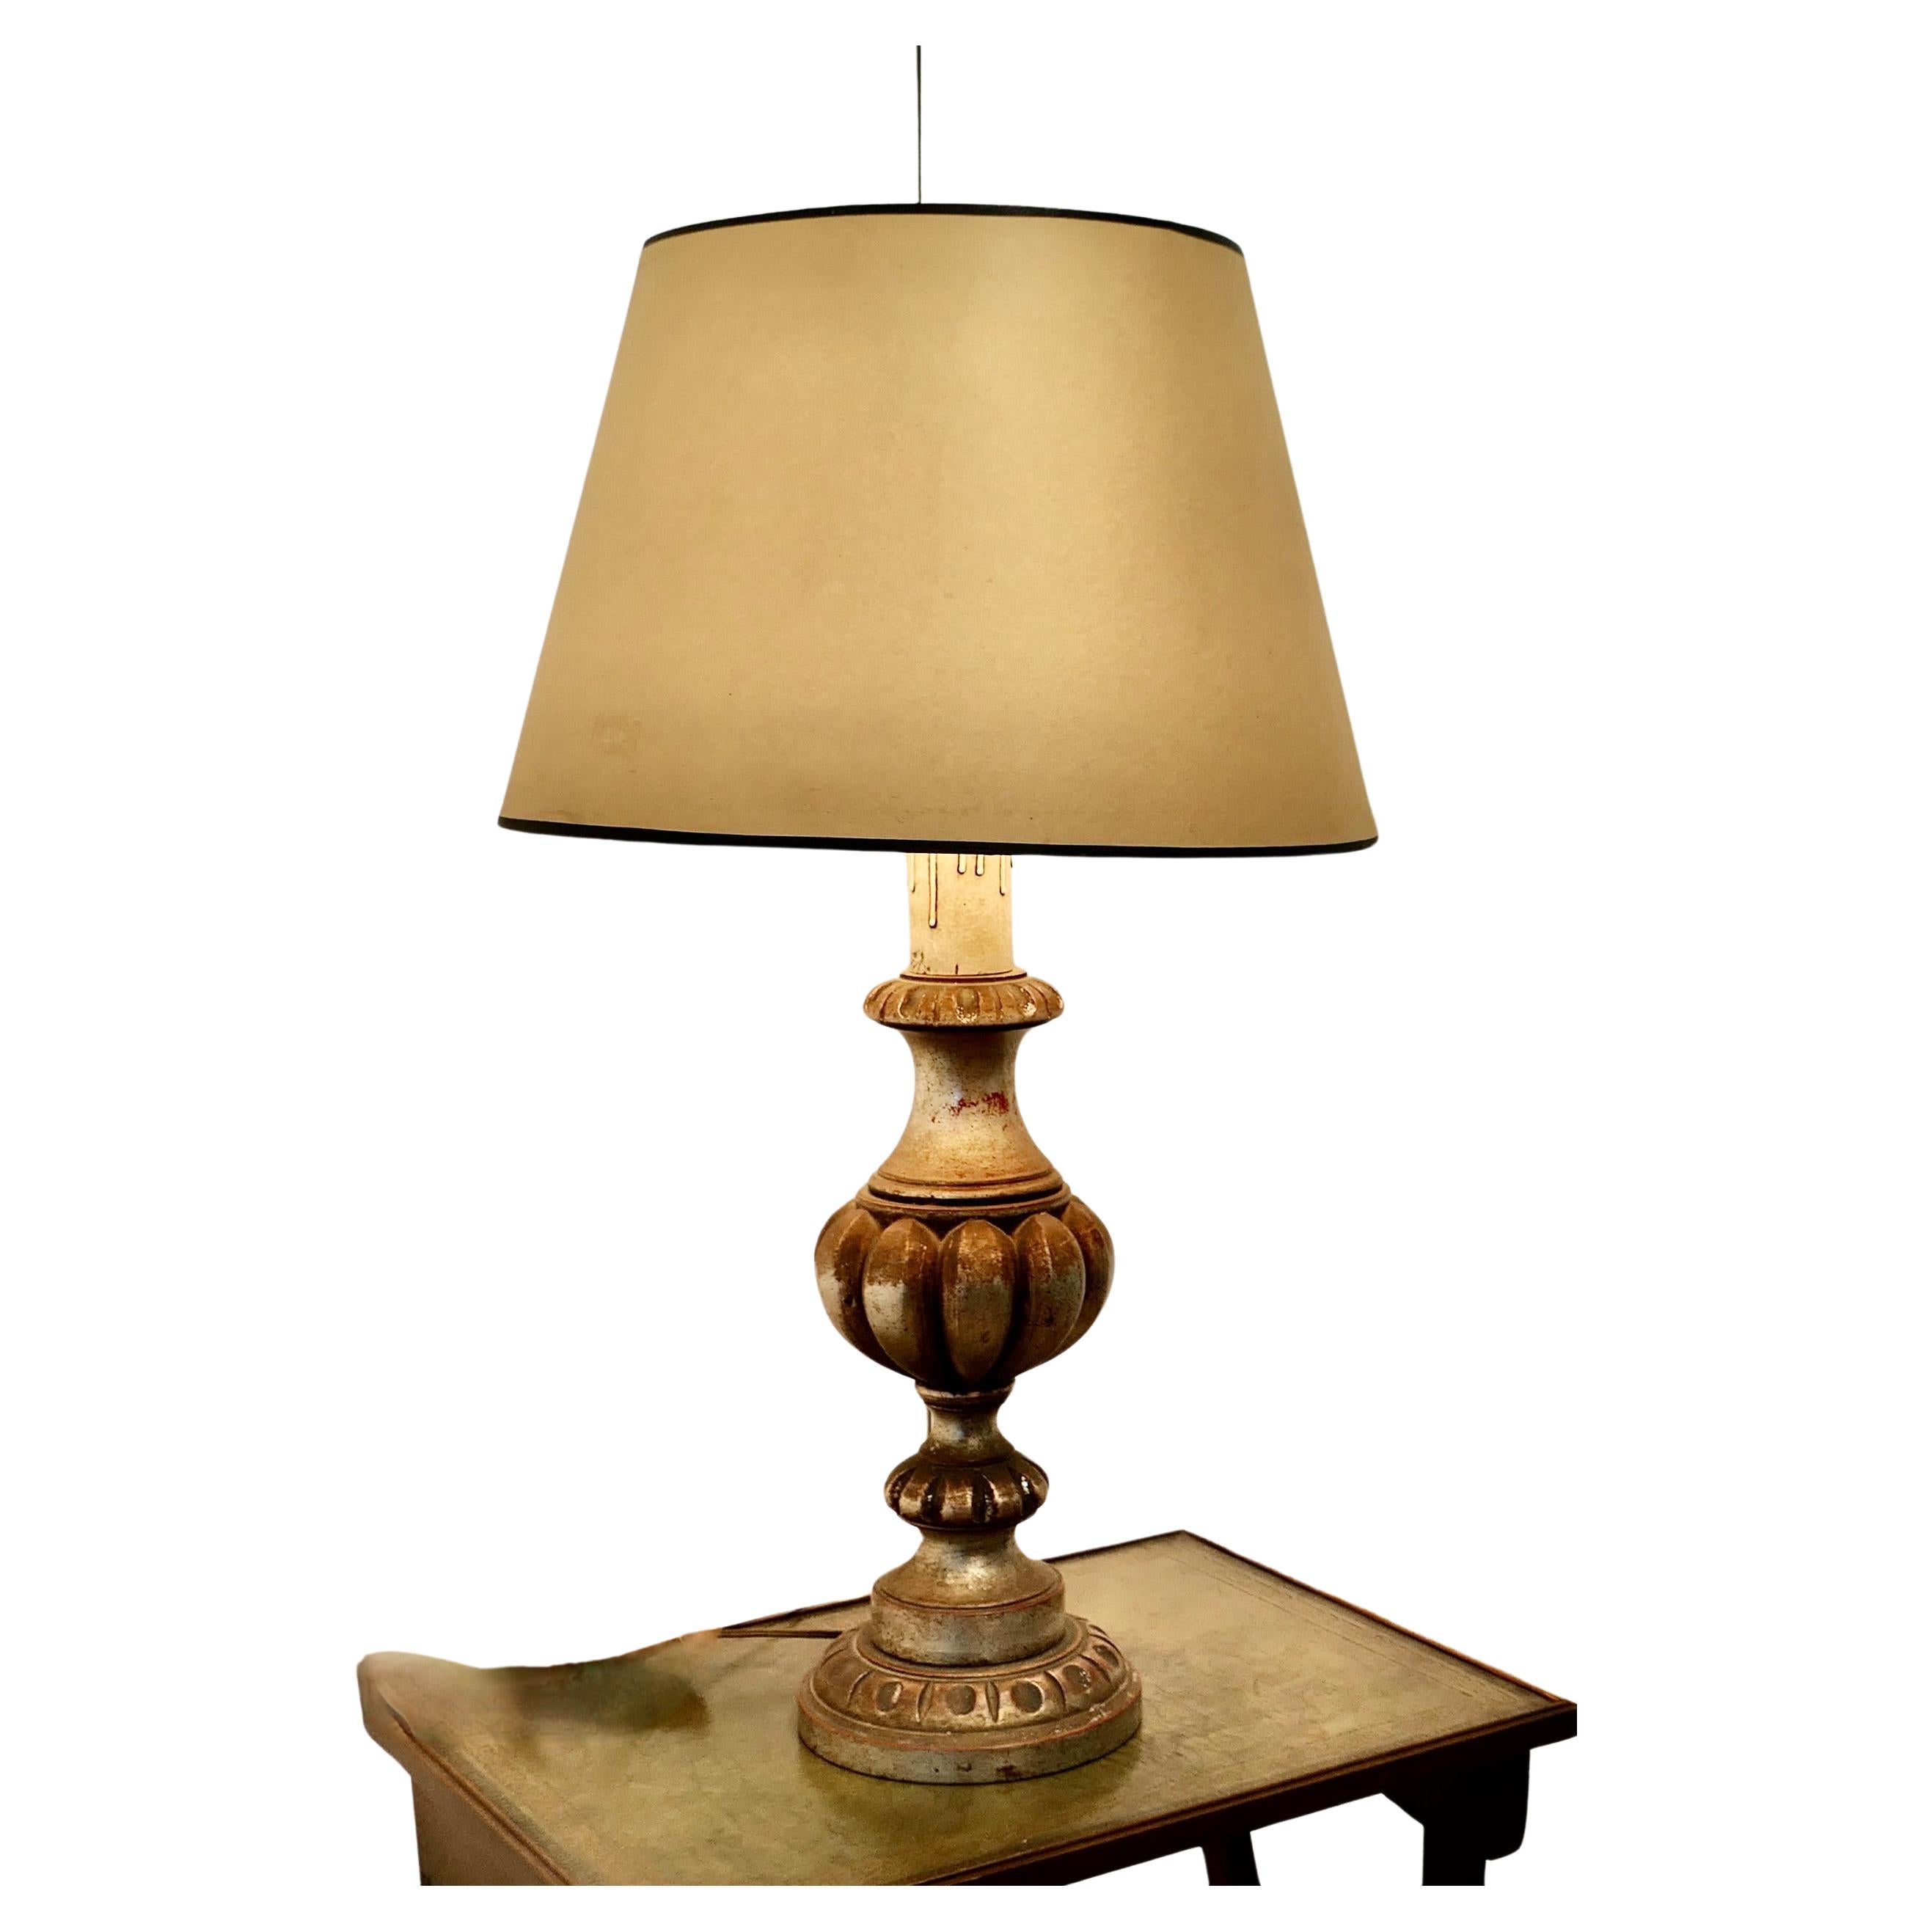 Large Carved Wooden Table Lamp  This is a great statement piece, it has a large 